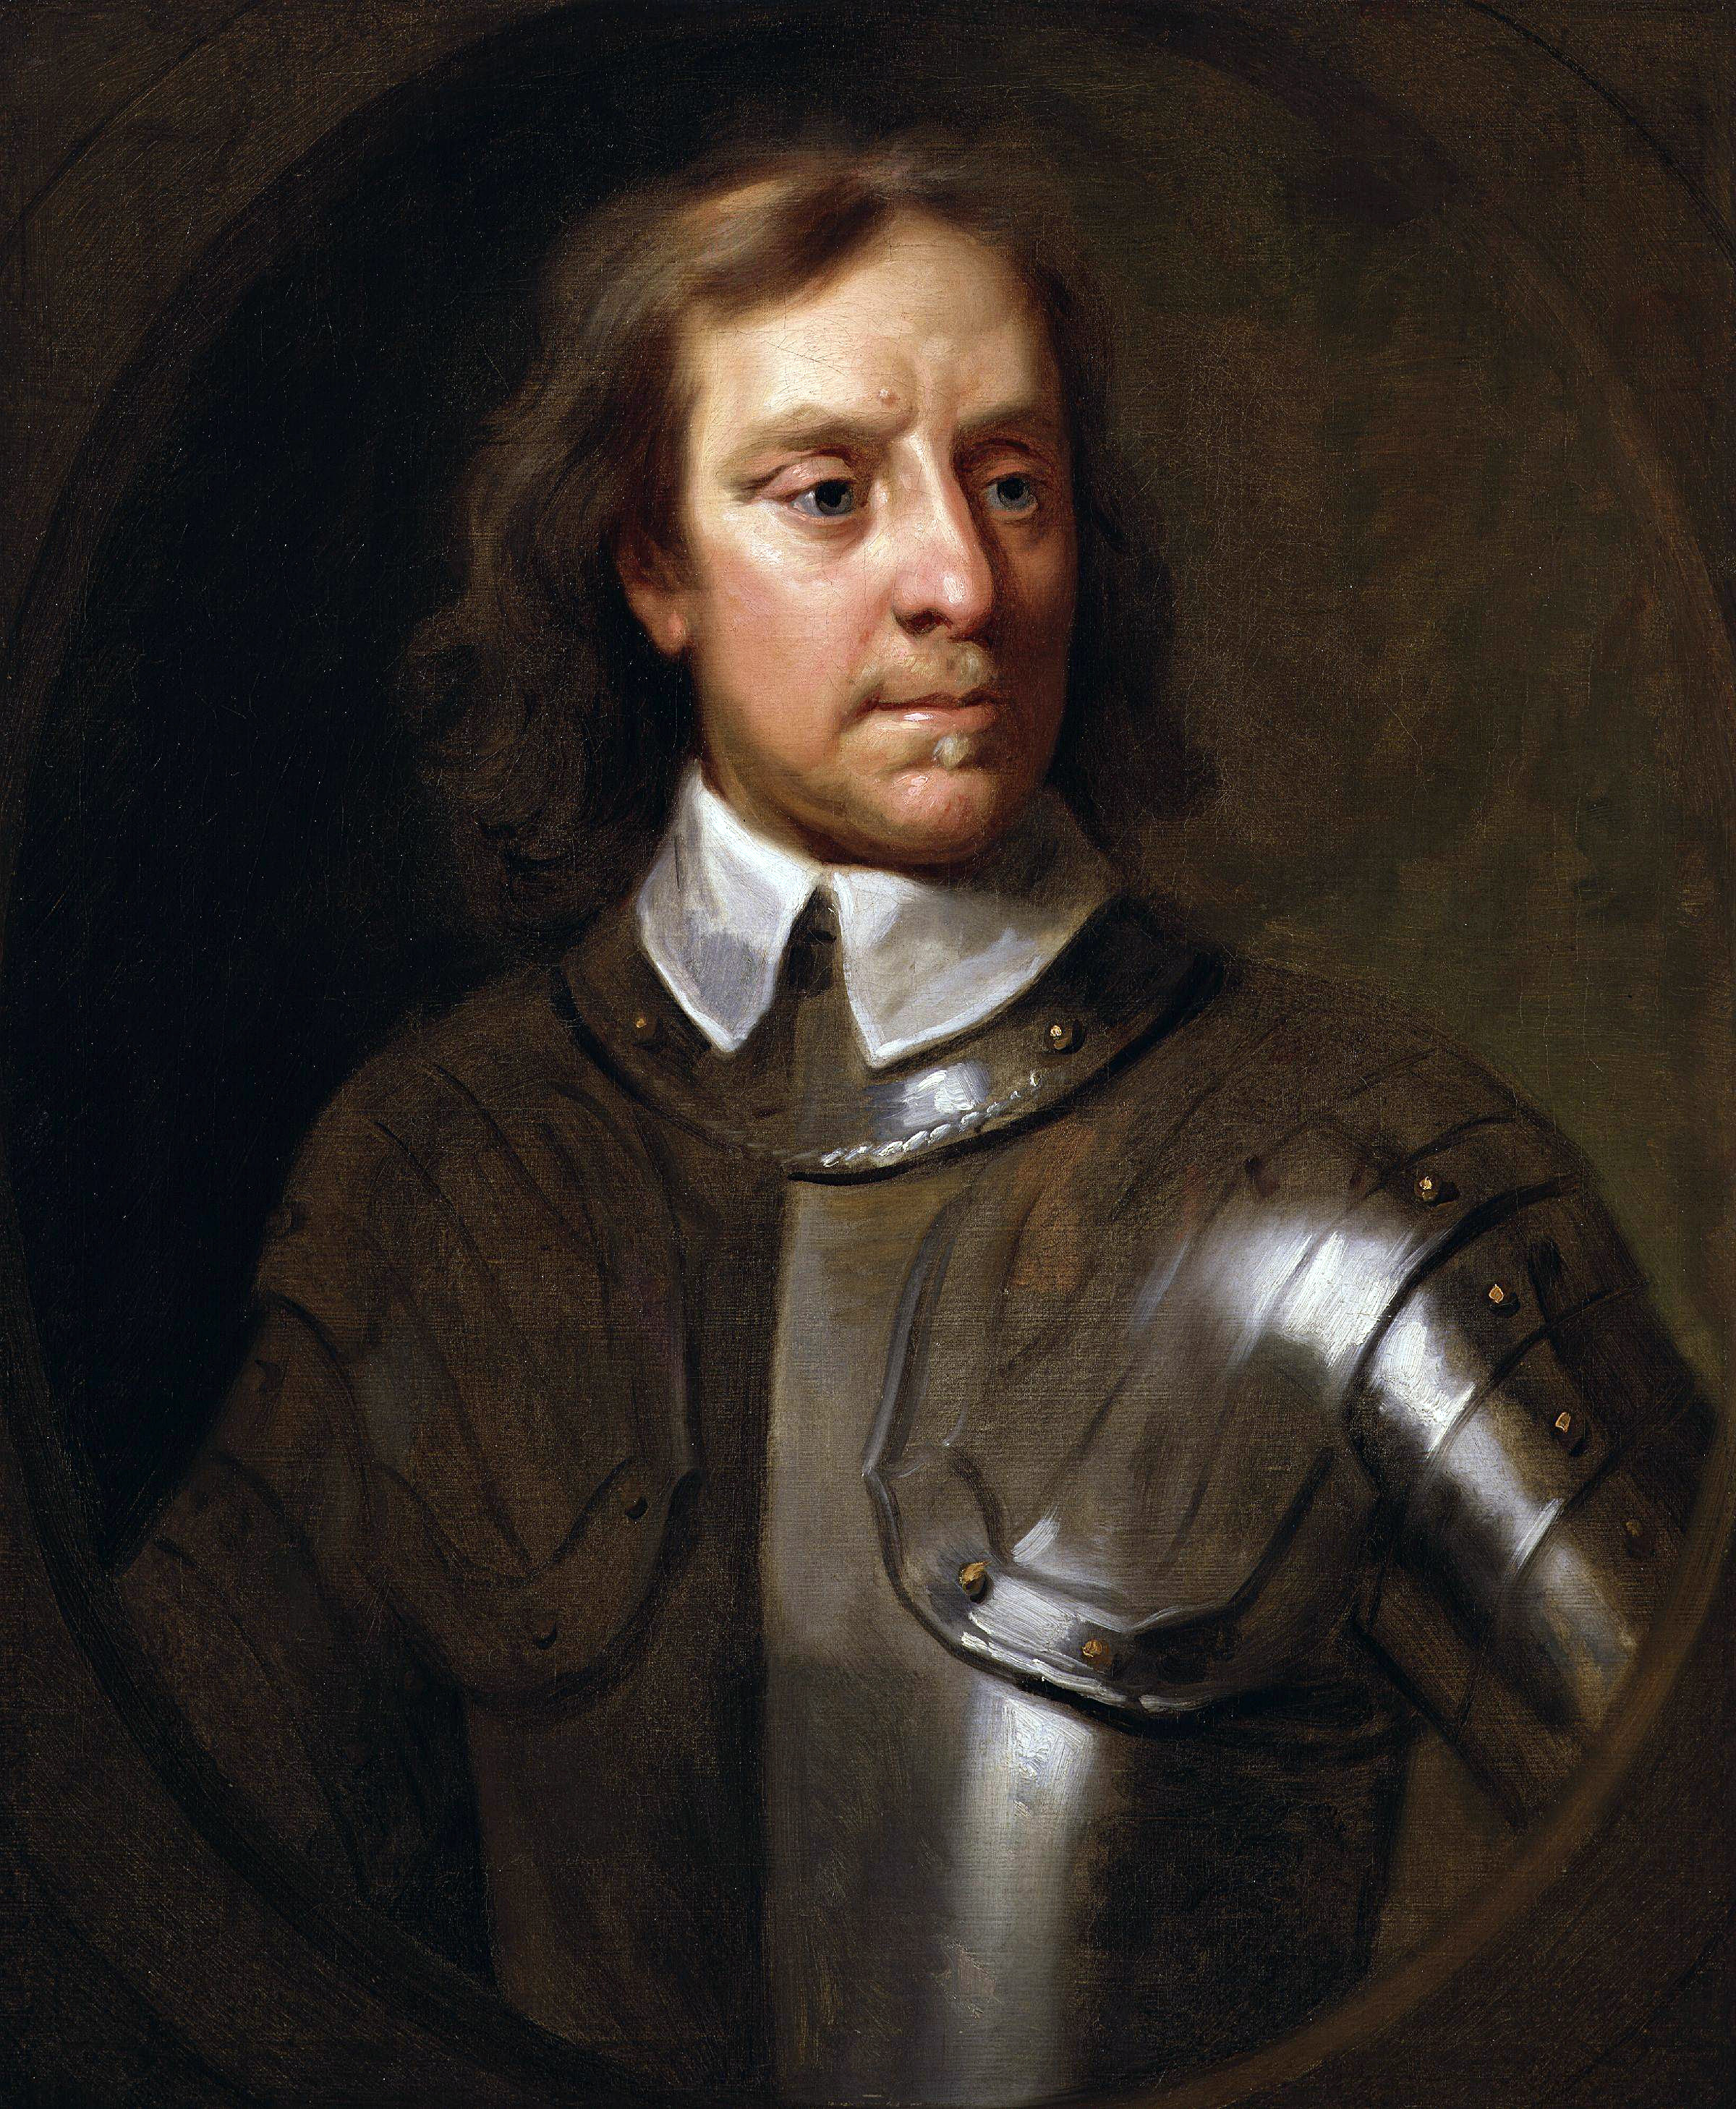 http://upload.wikimedia.org/wikipedia/commons/2/24/Oliver_Cromwell_by_Samuel_Cooper.jpg